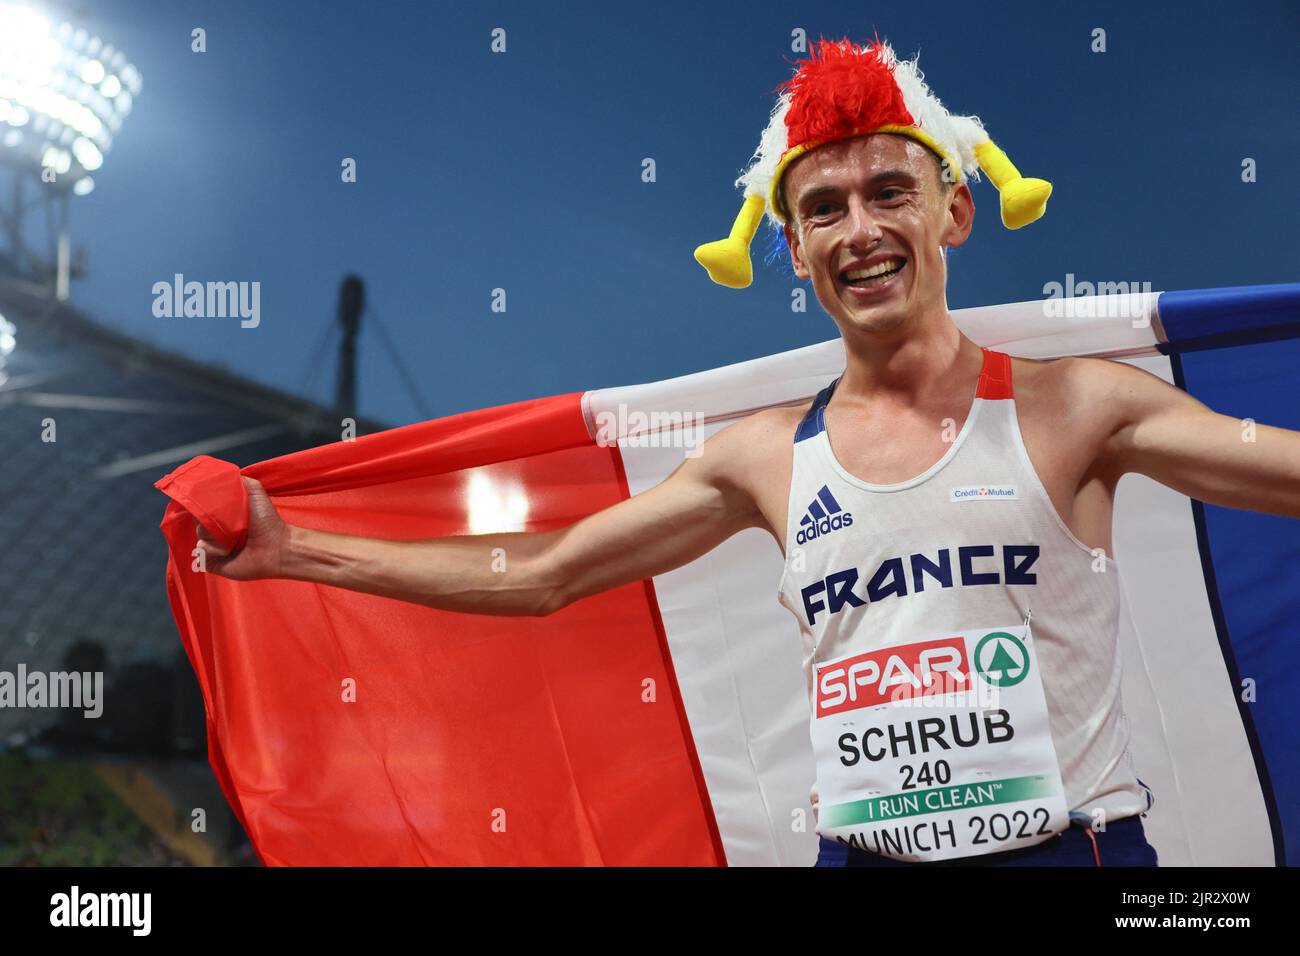 2022 European Championships - Athletics - Olympiastadion, Munich, Germany - August 21, 2022 France's Yann Schrub celebrates after winning bronze in the men's 10,000m final REUTERS/Wolfgang Rattay Stock Photo